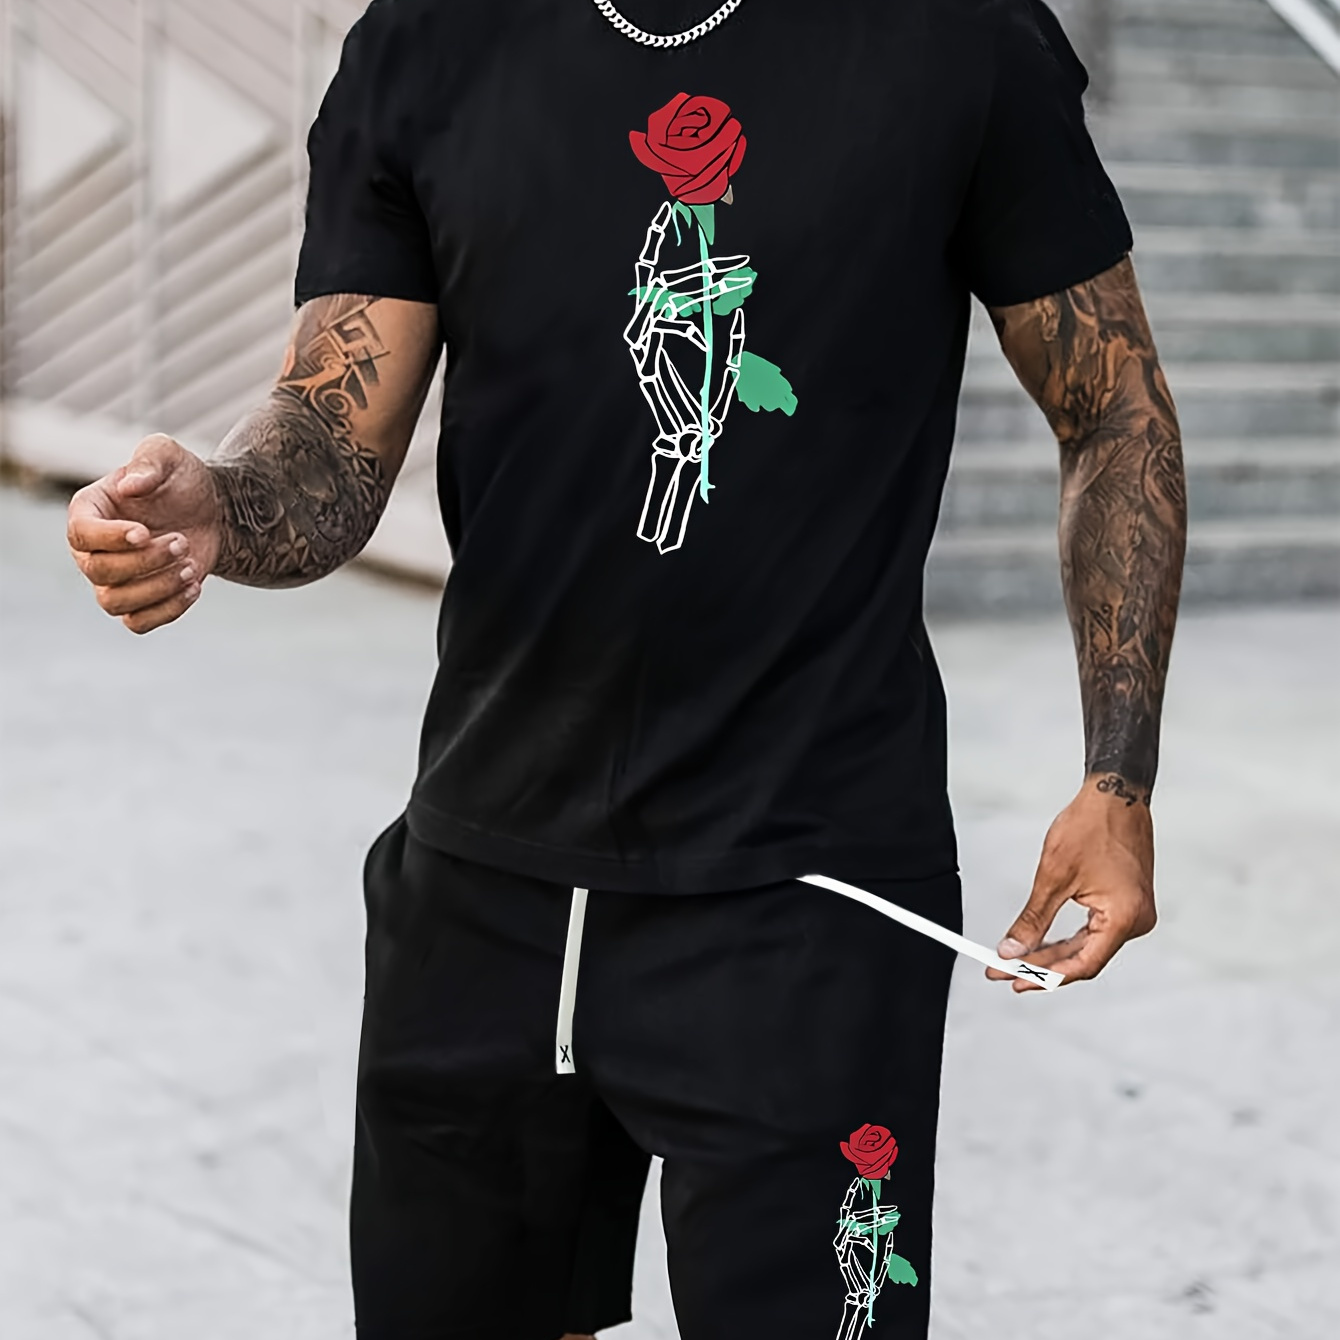 

Red Rose Print Men's 2pcs Trendy Outfits Casual Loose Crew Neck Short Sleeve T-shirt Top & Comfy Sports Drawstring Shorts Pants Trousers For Spring Summer Workout Men's Clothing